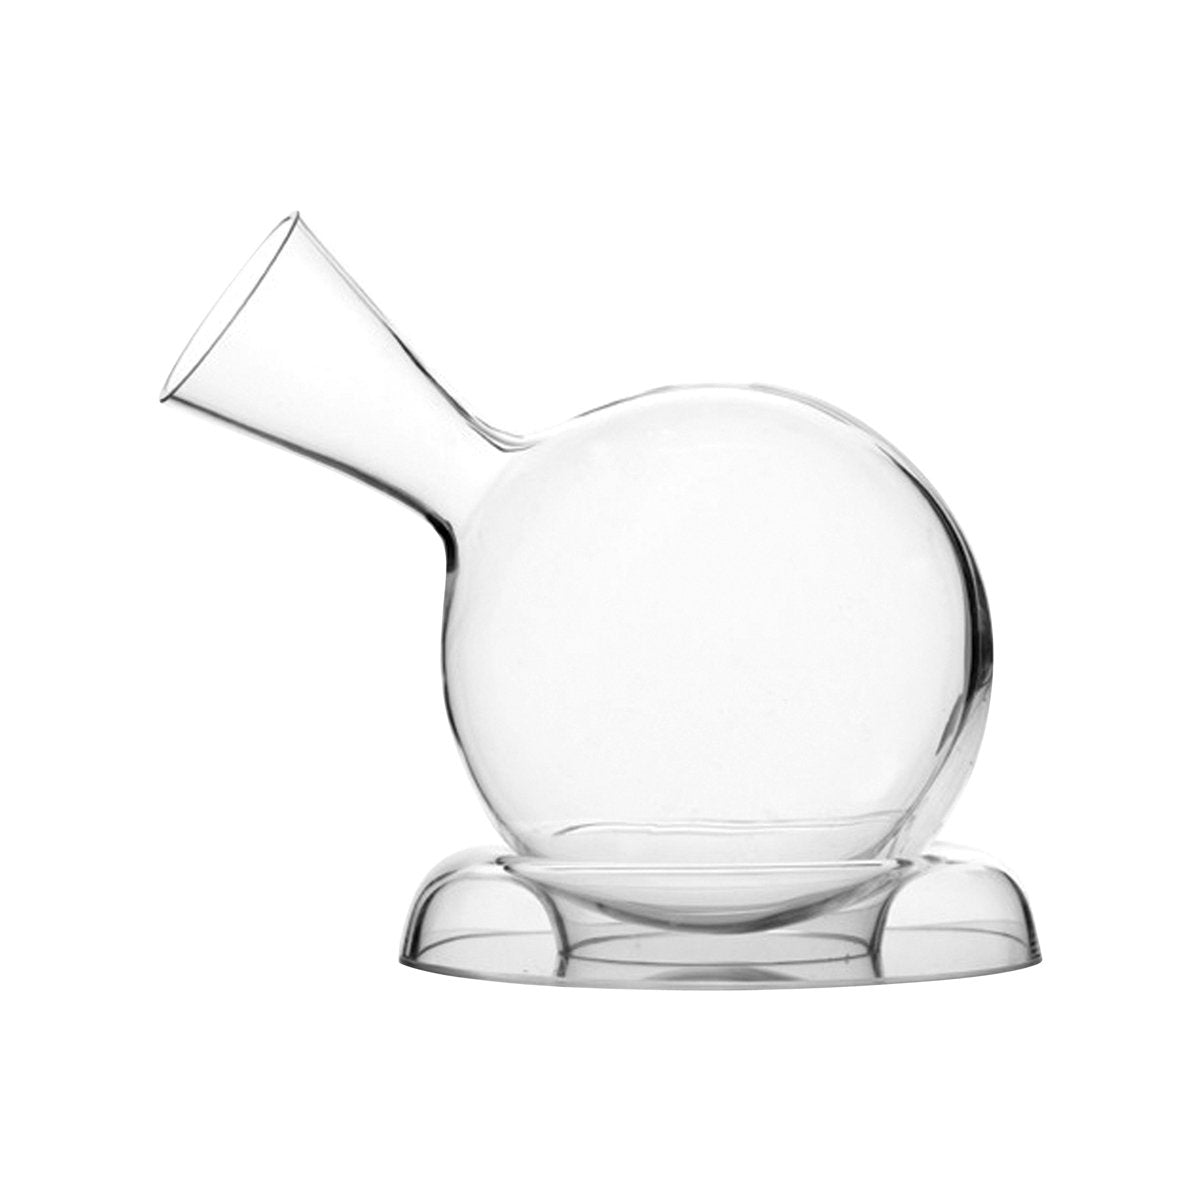 365-264 Stolzle Earth Decanter with Stand 750ml Tomkin Australia Hospitality Supplies